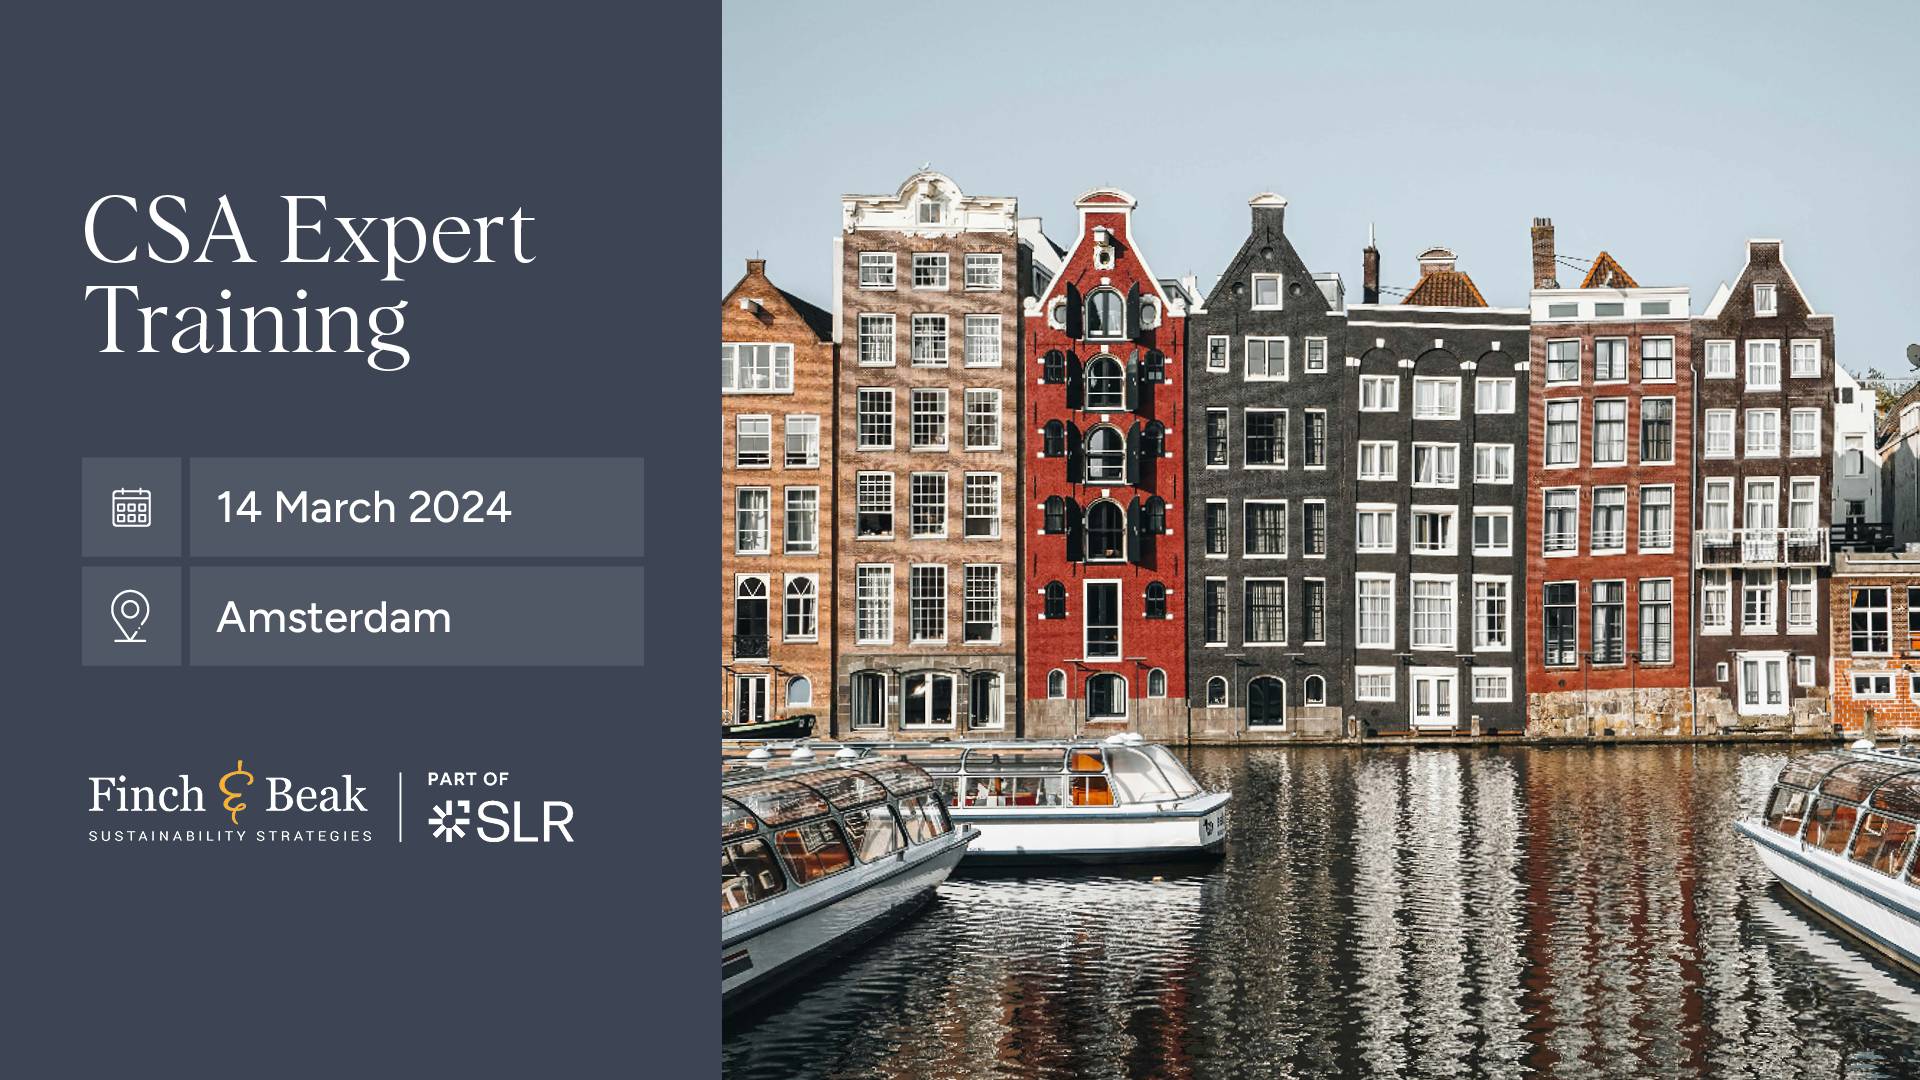 Join the CSA Expert Training in Amsterdam